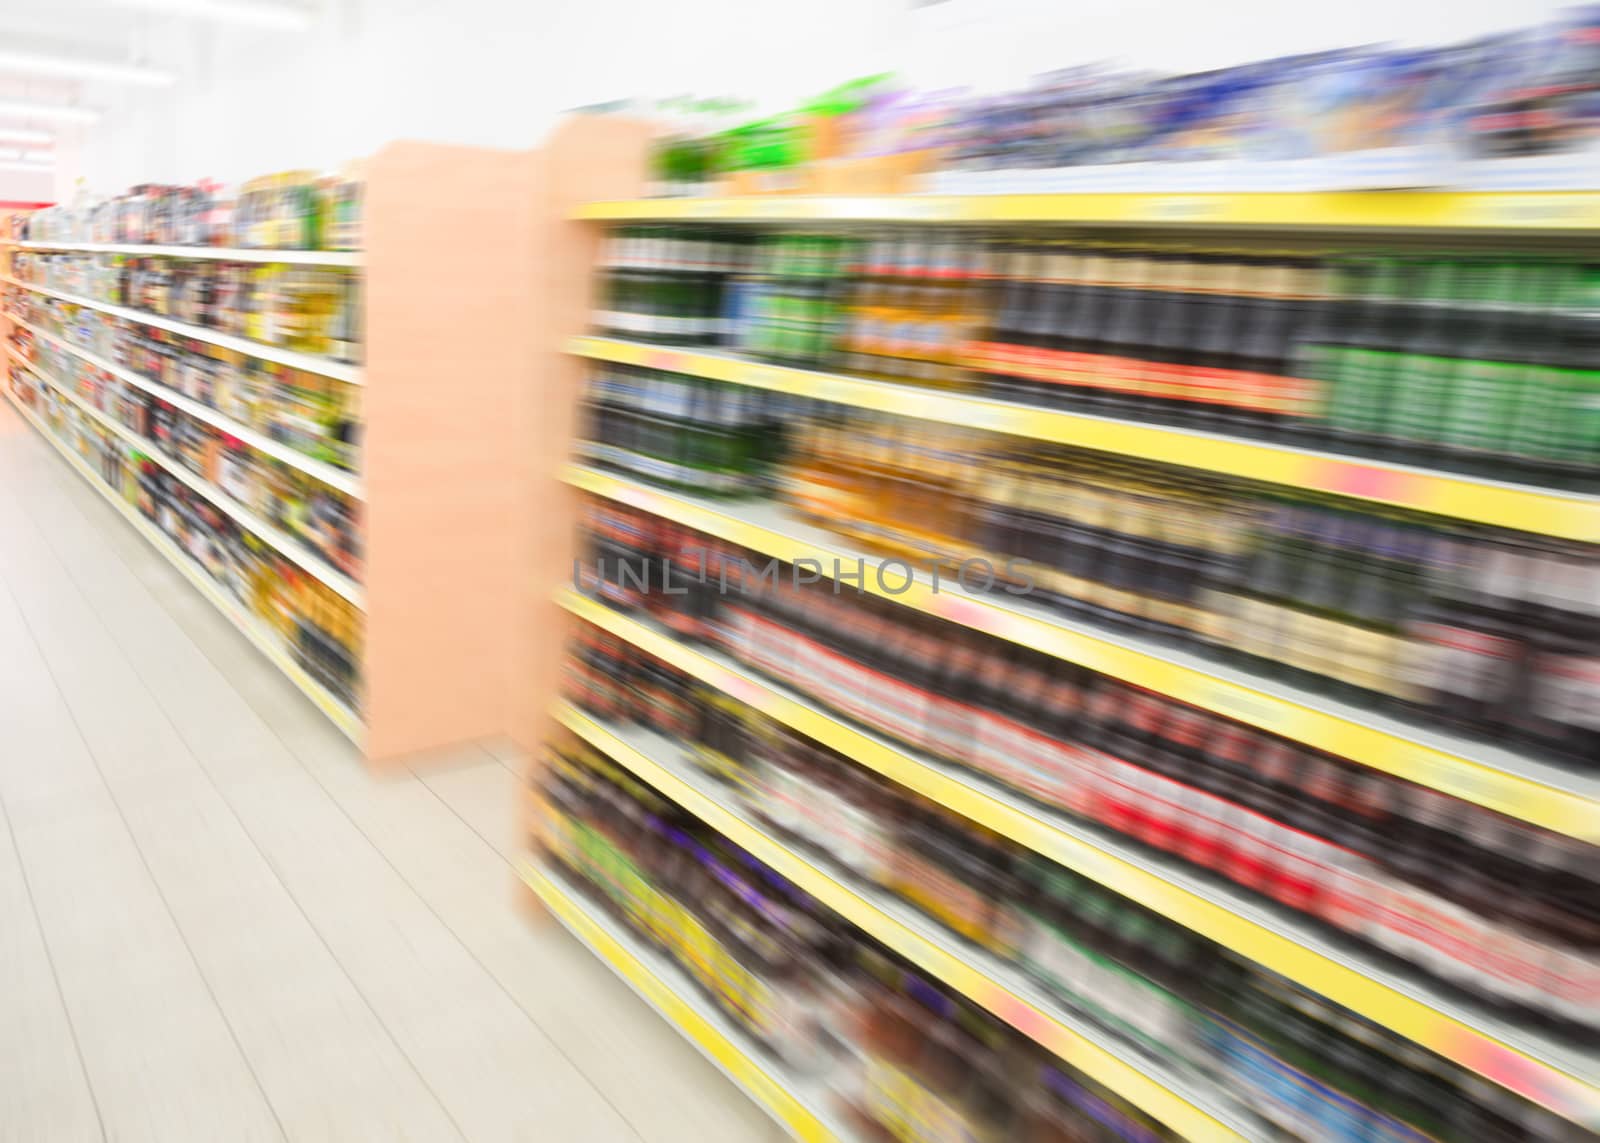 Long shelves with beverages bottles in big grocery food store in supermarket. Filtered stock photo blurred in motion.